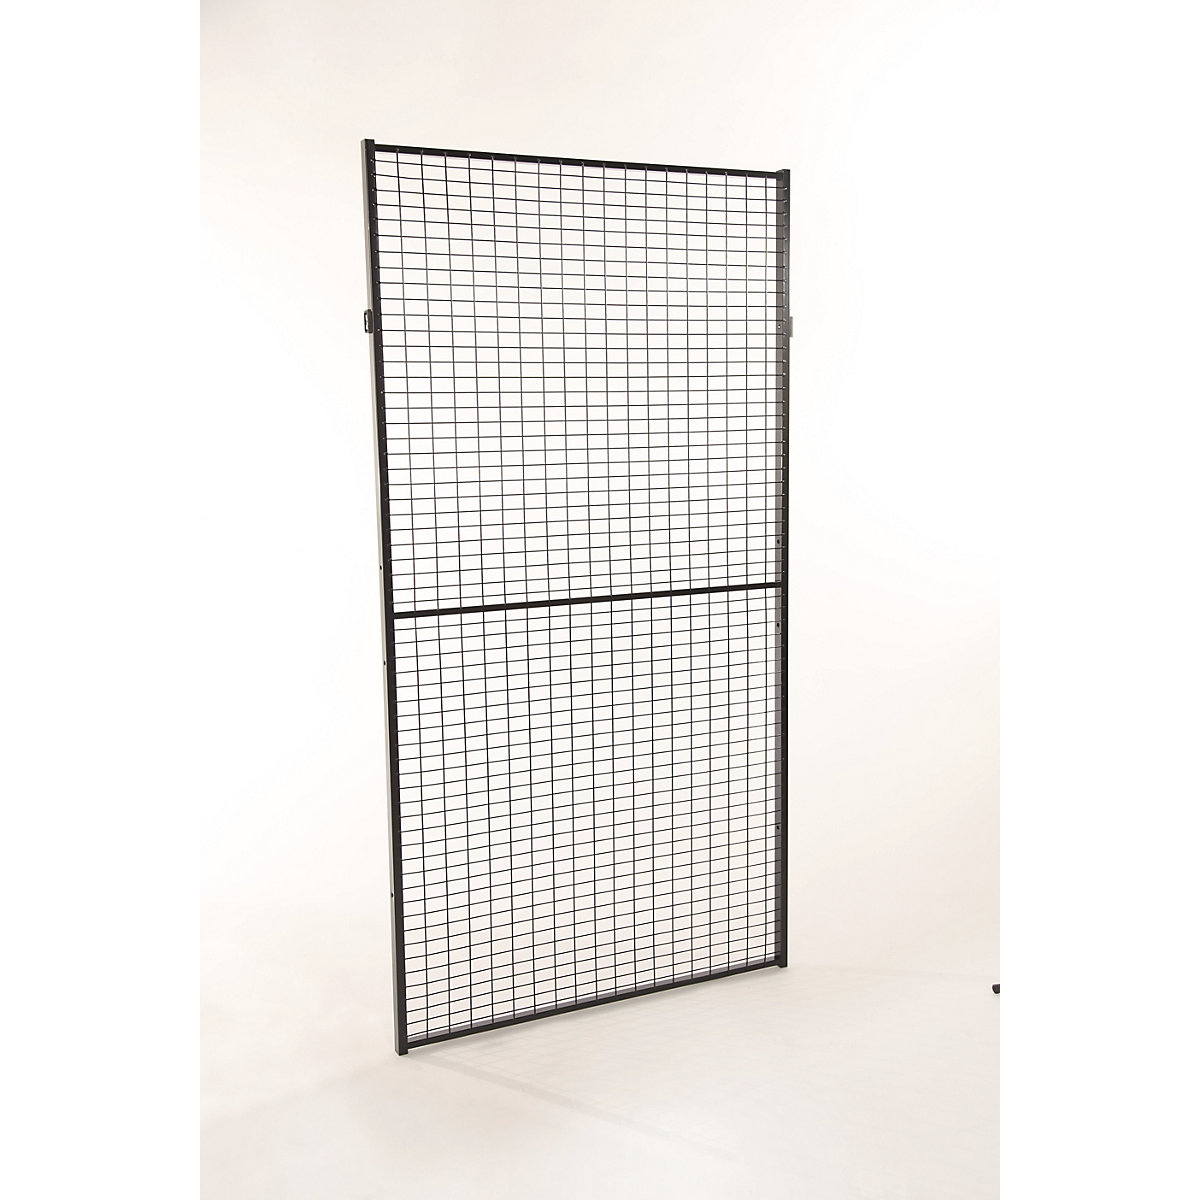 Axelent – X-GUARD CLASSIC machine protective fencing, wall section, height 1900 mm, width 900 mm